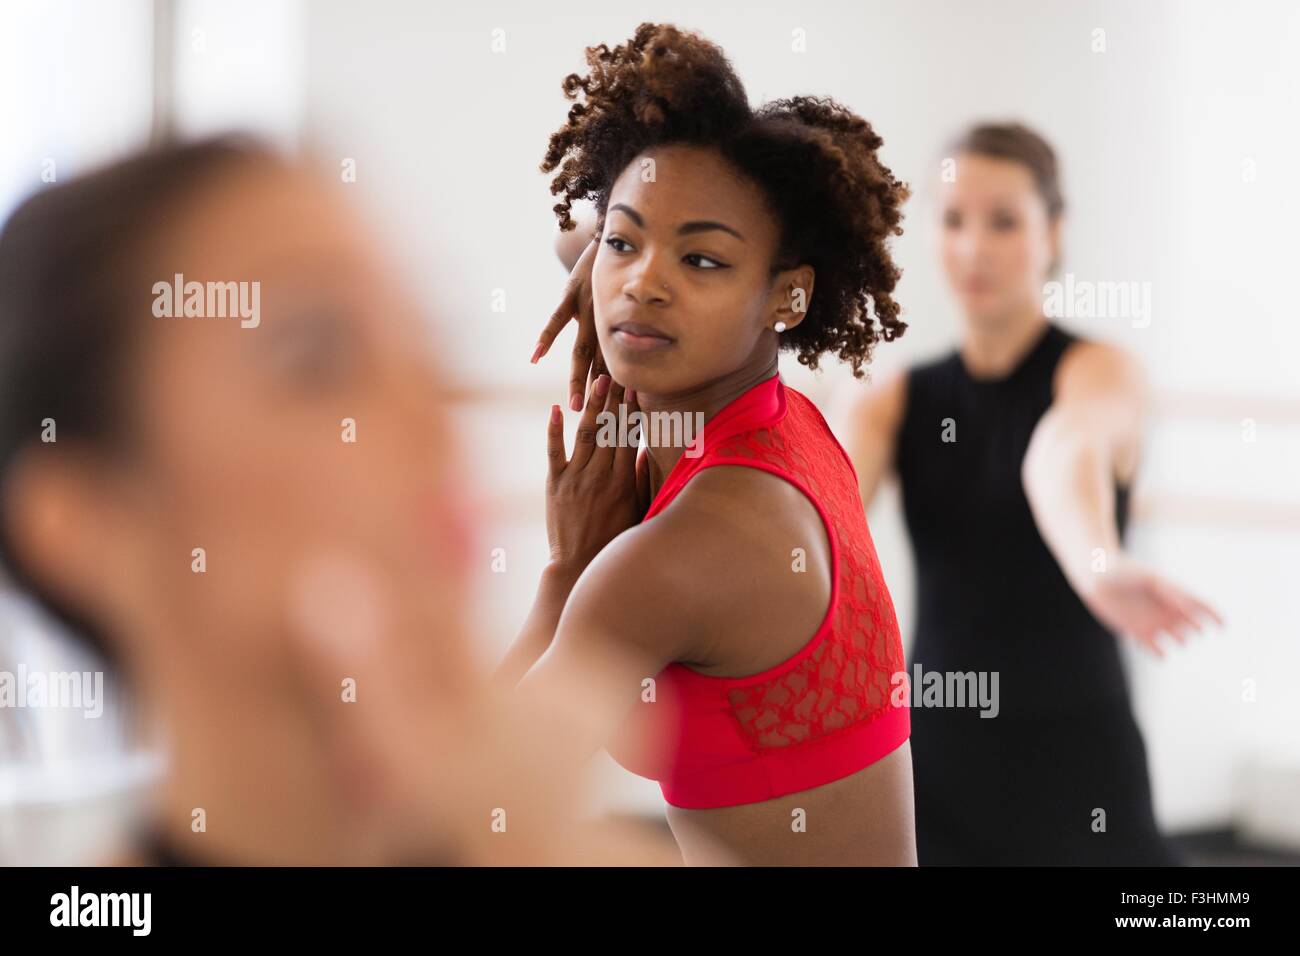 Young women dancing looking away, differential focus Stock Photo